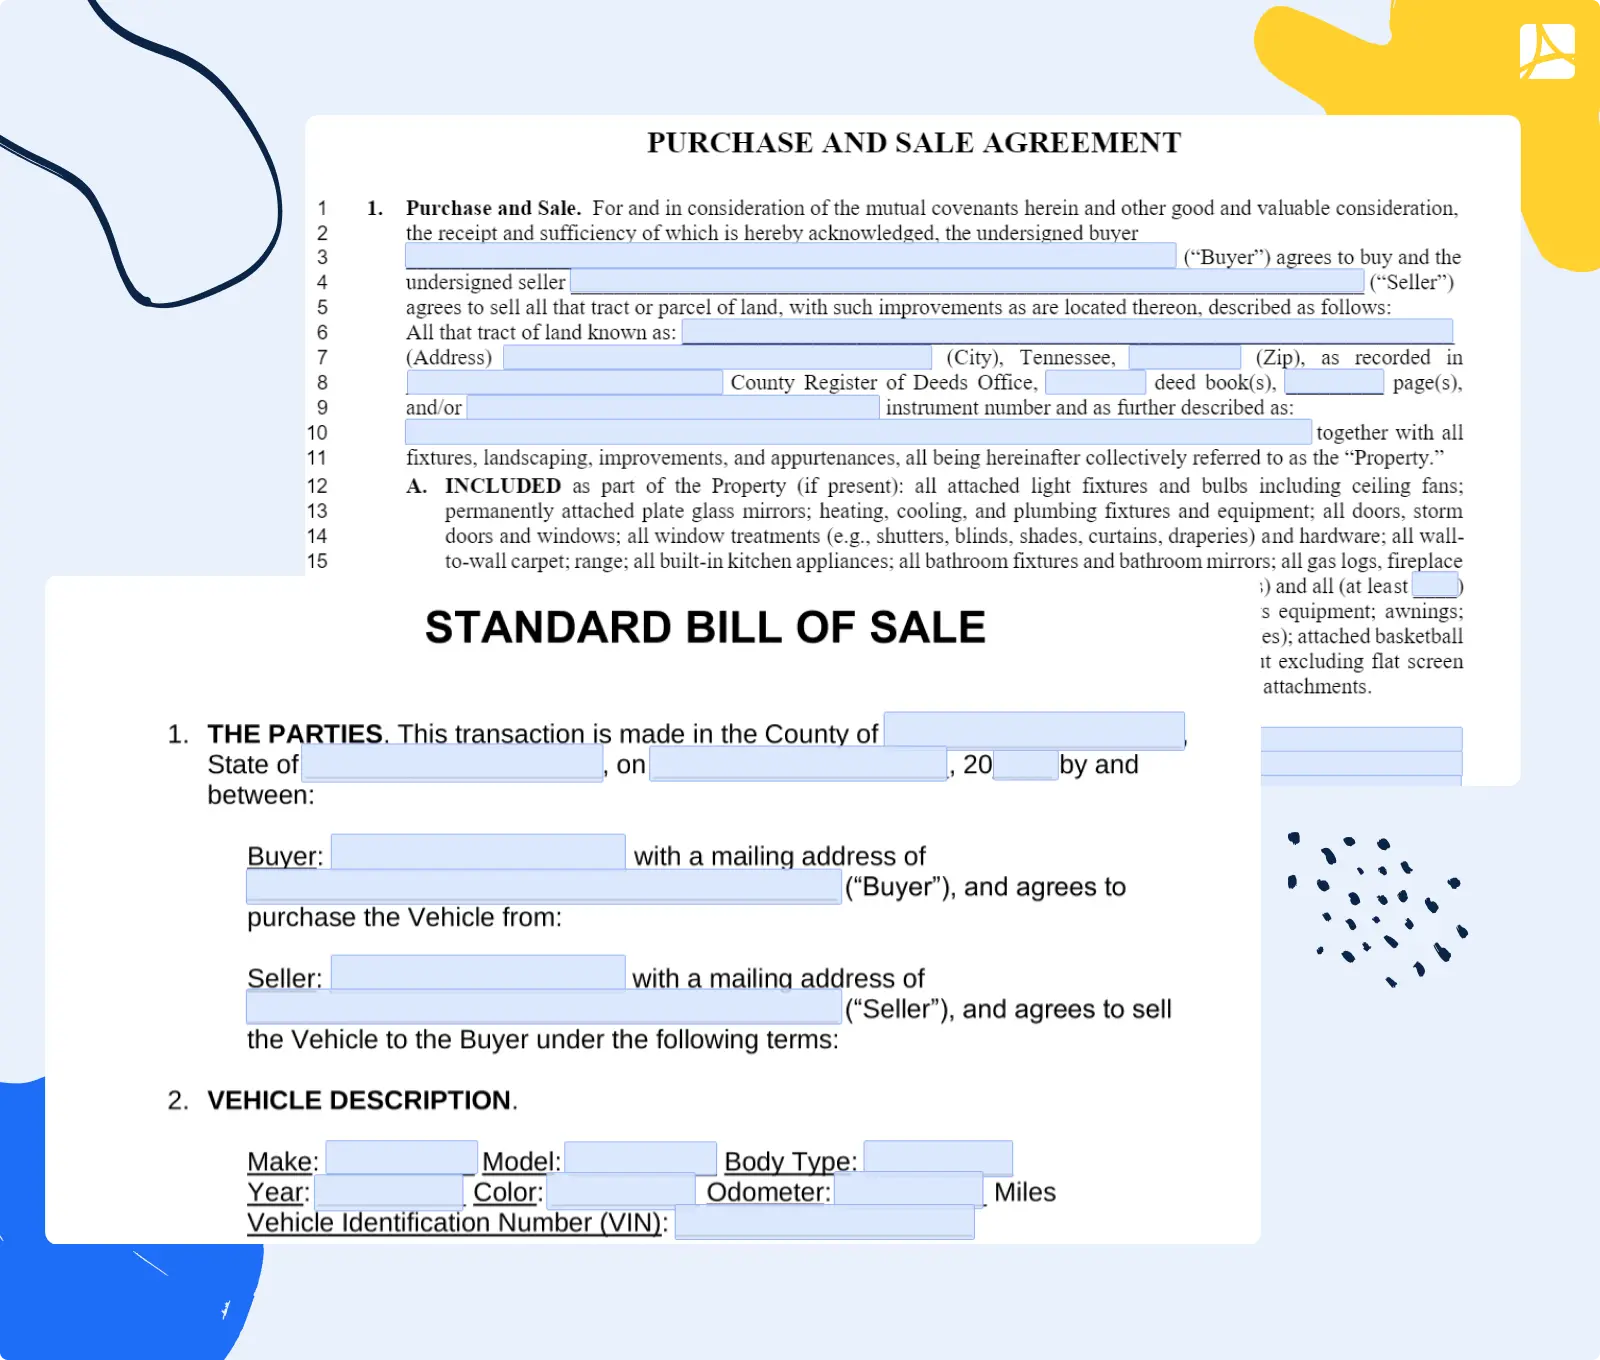 purchase and sale vs. bill of sale image